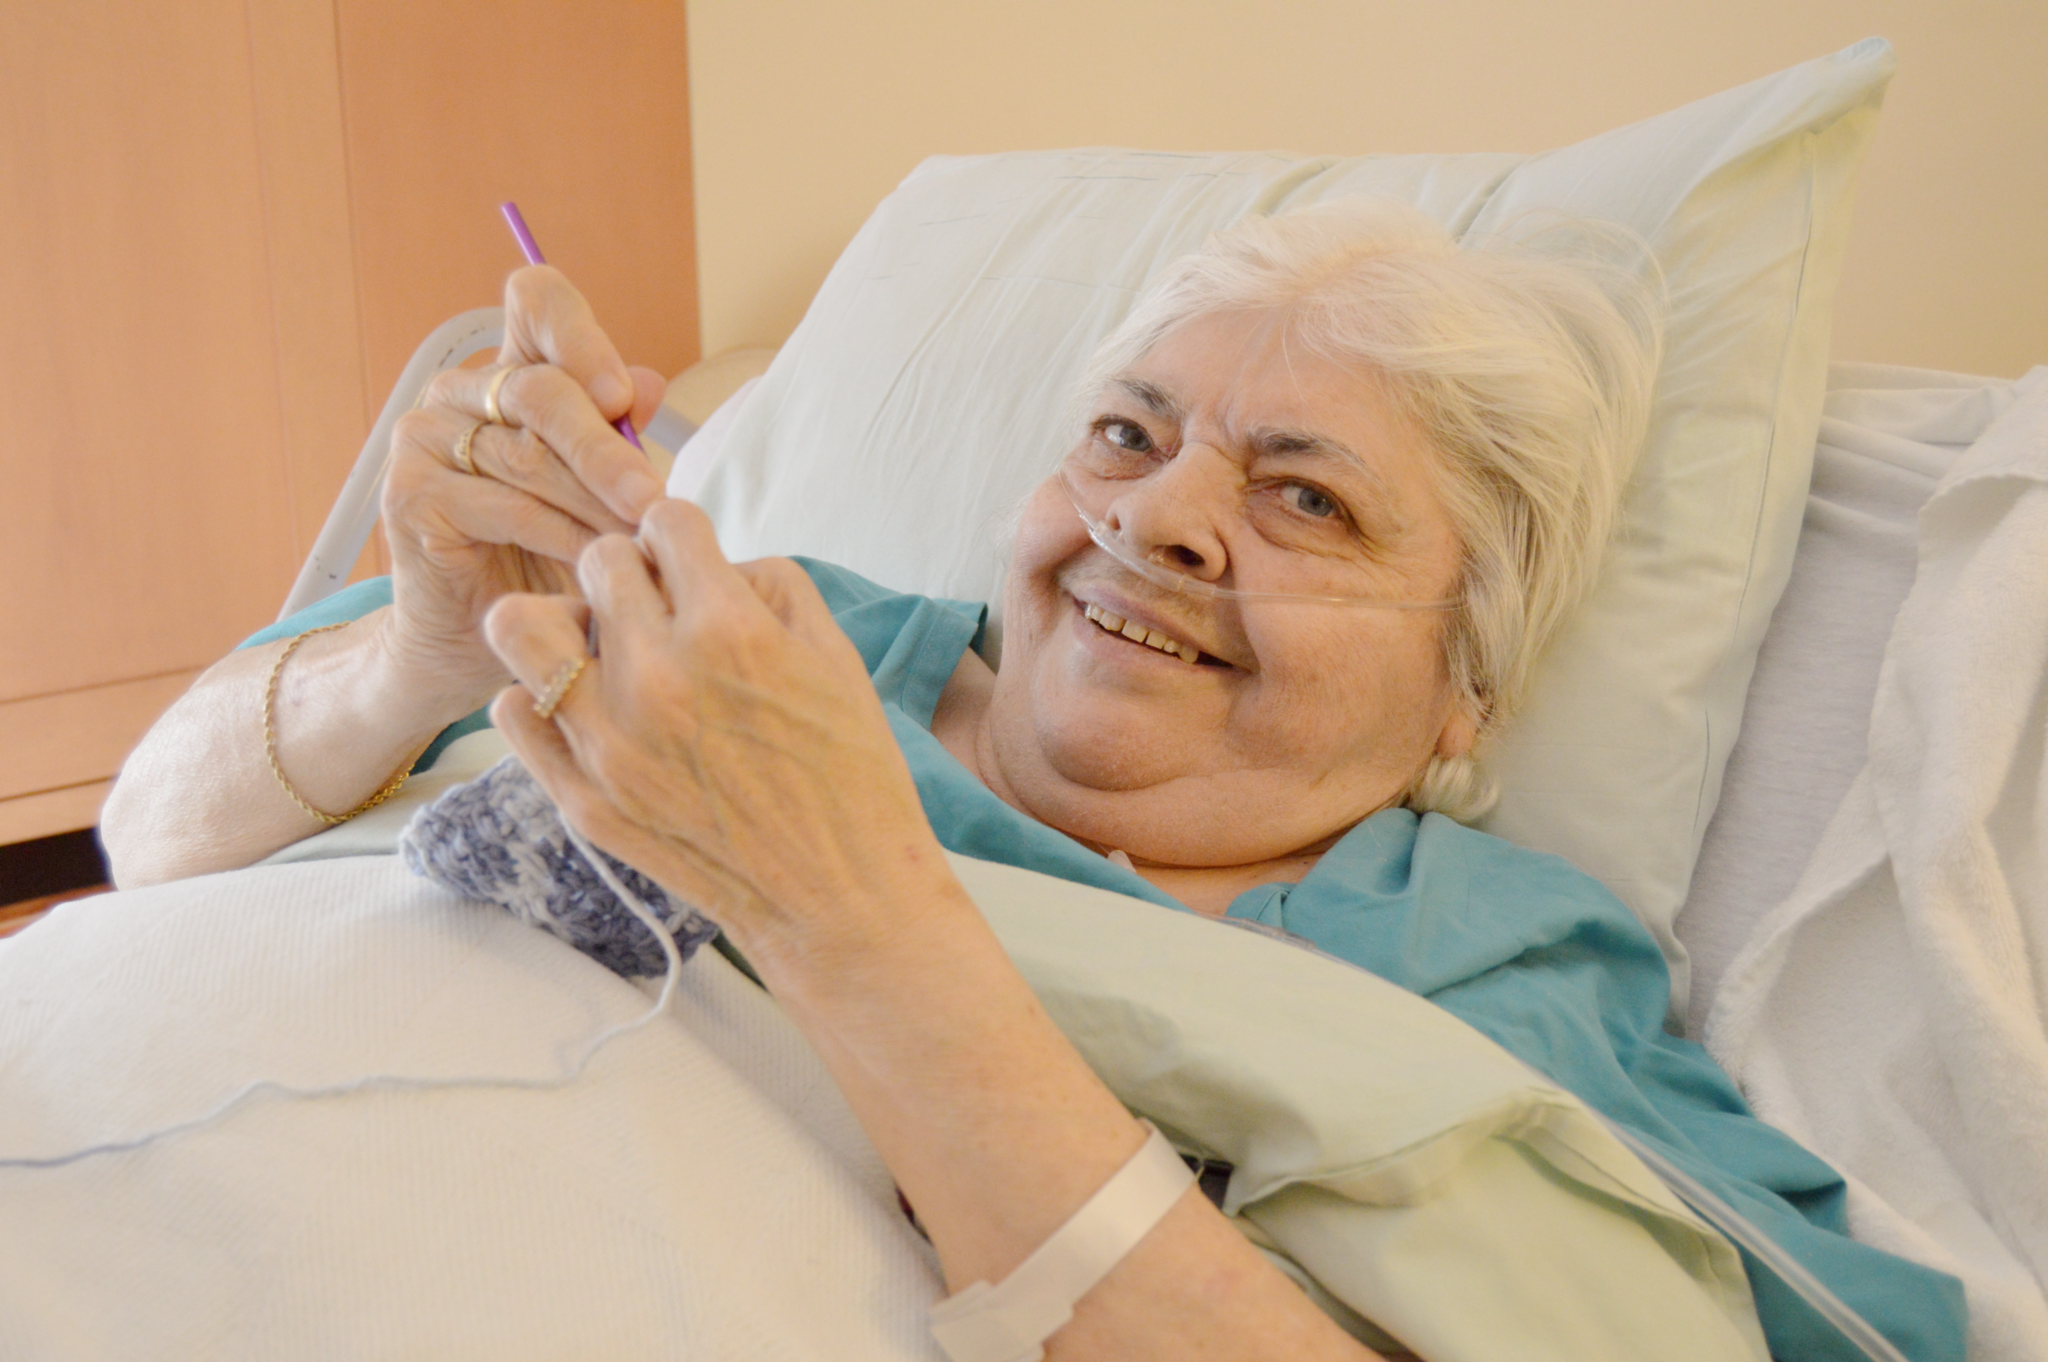 Woman laying in hospice bed knitting and smiling; through hospice care, she is able to stay comfortable at end of life